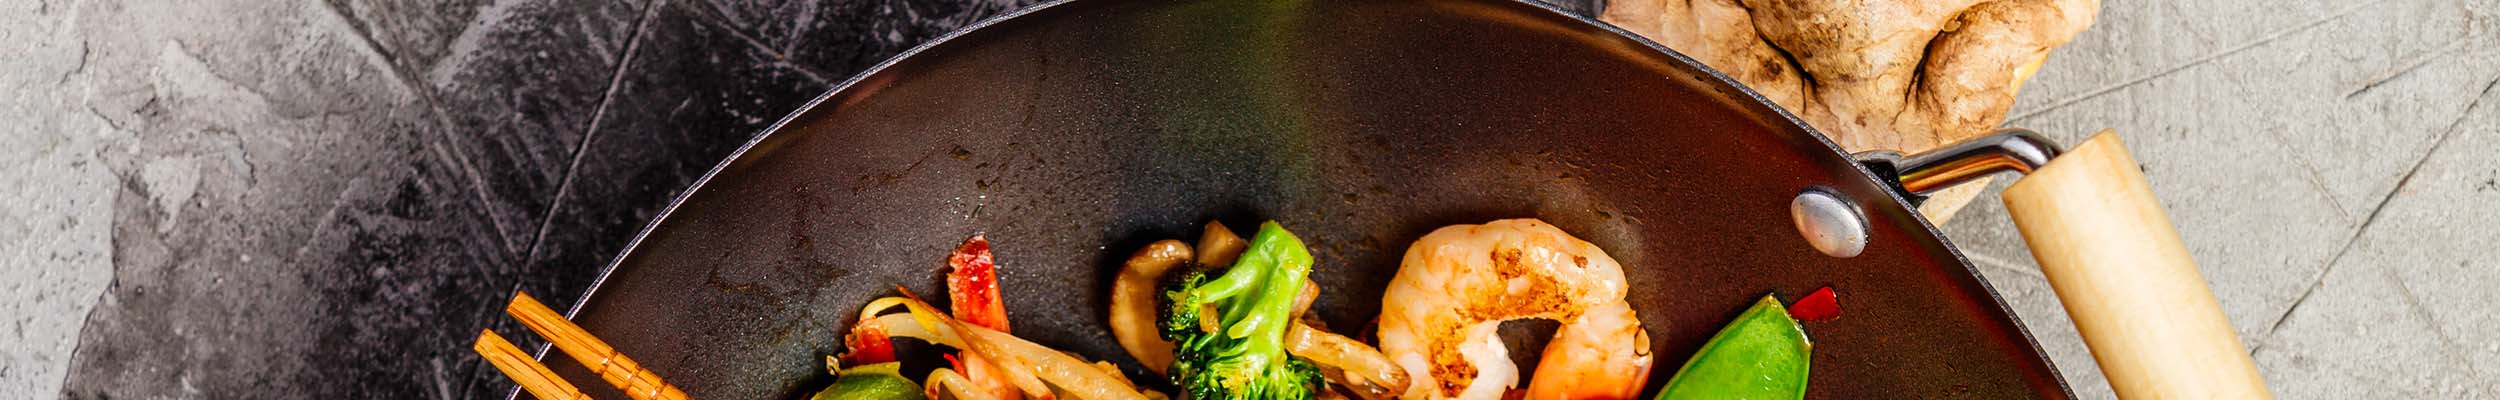 Double wood handle wok with stir fry shrimp with vegetables